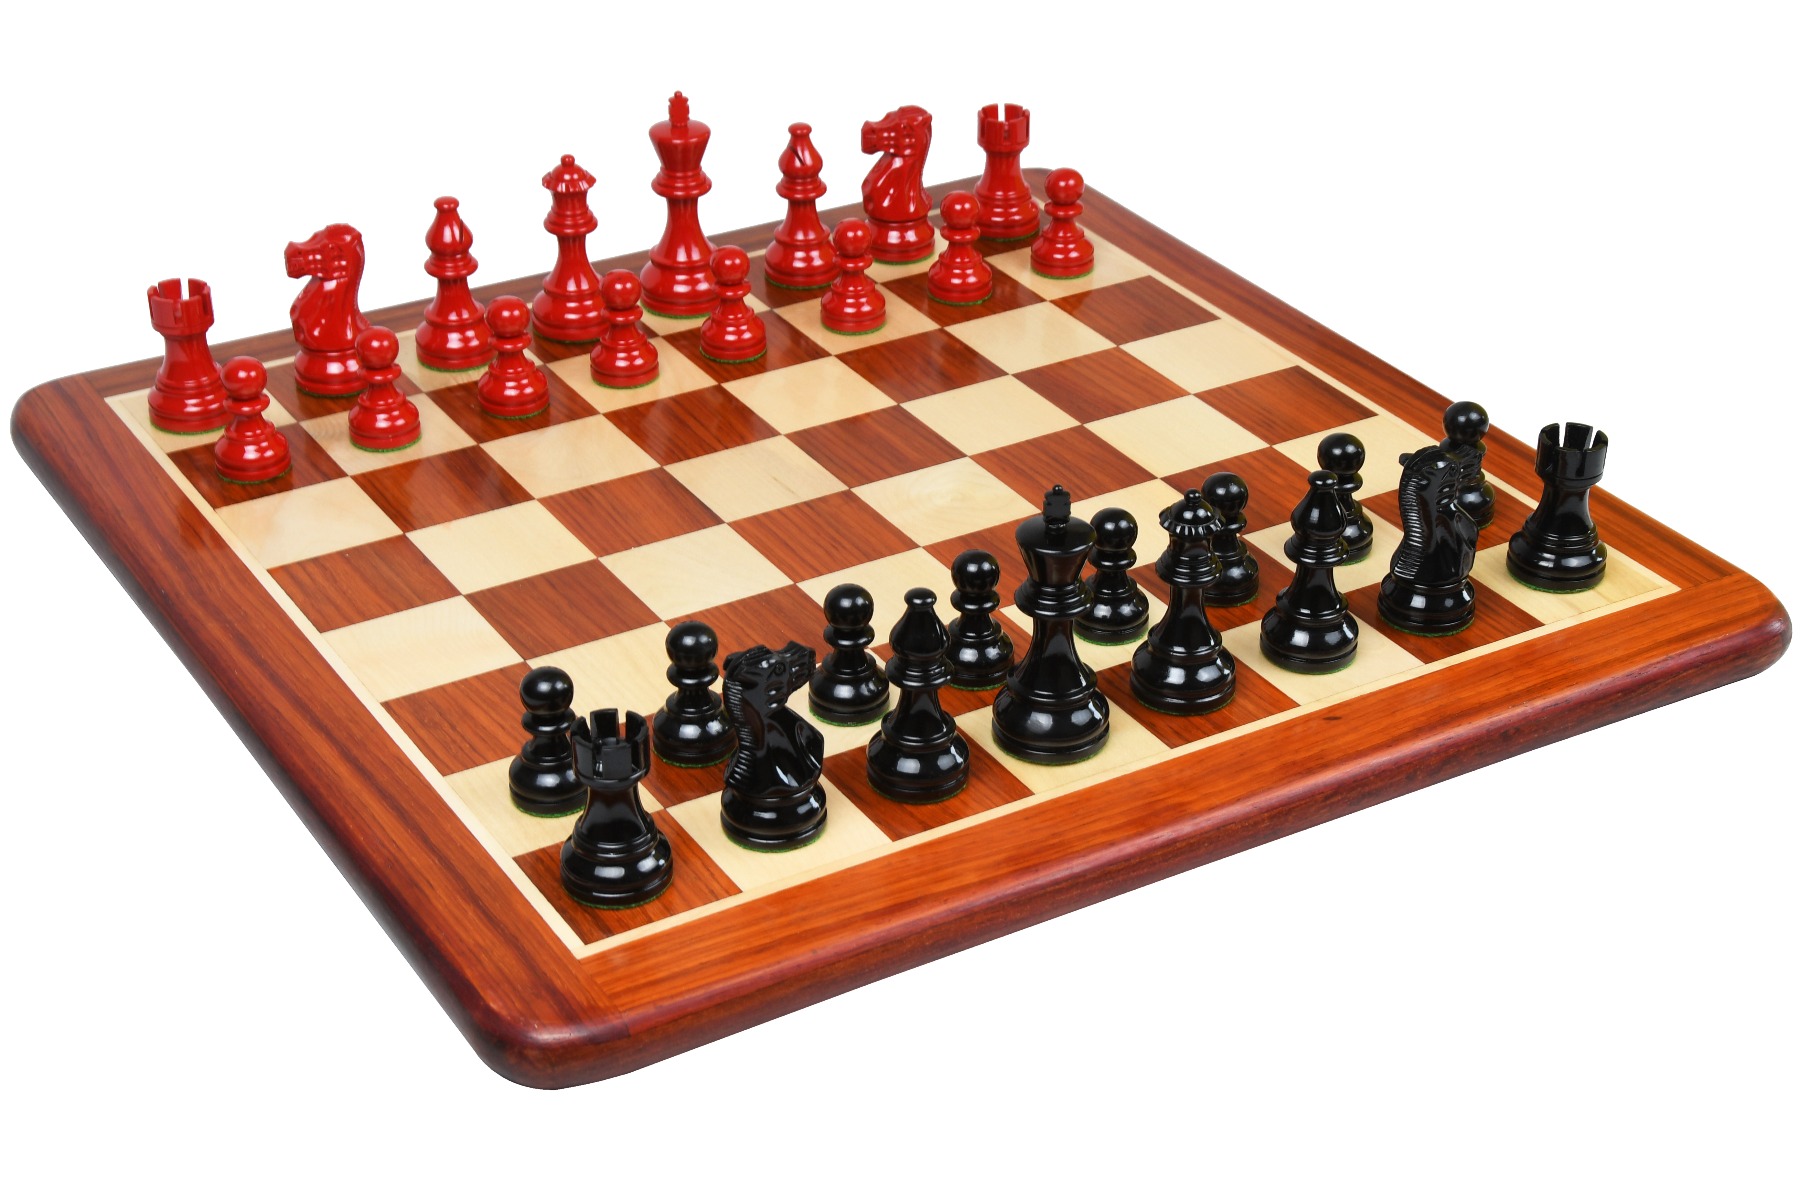 CHESSBAZAAR Wooden Chess Board Blood Red Bud Rose Wood 21" 55 mm 